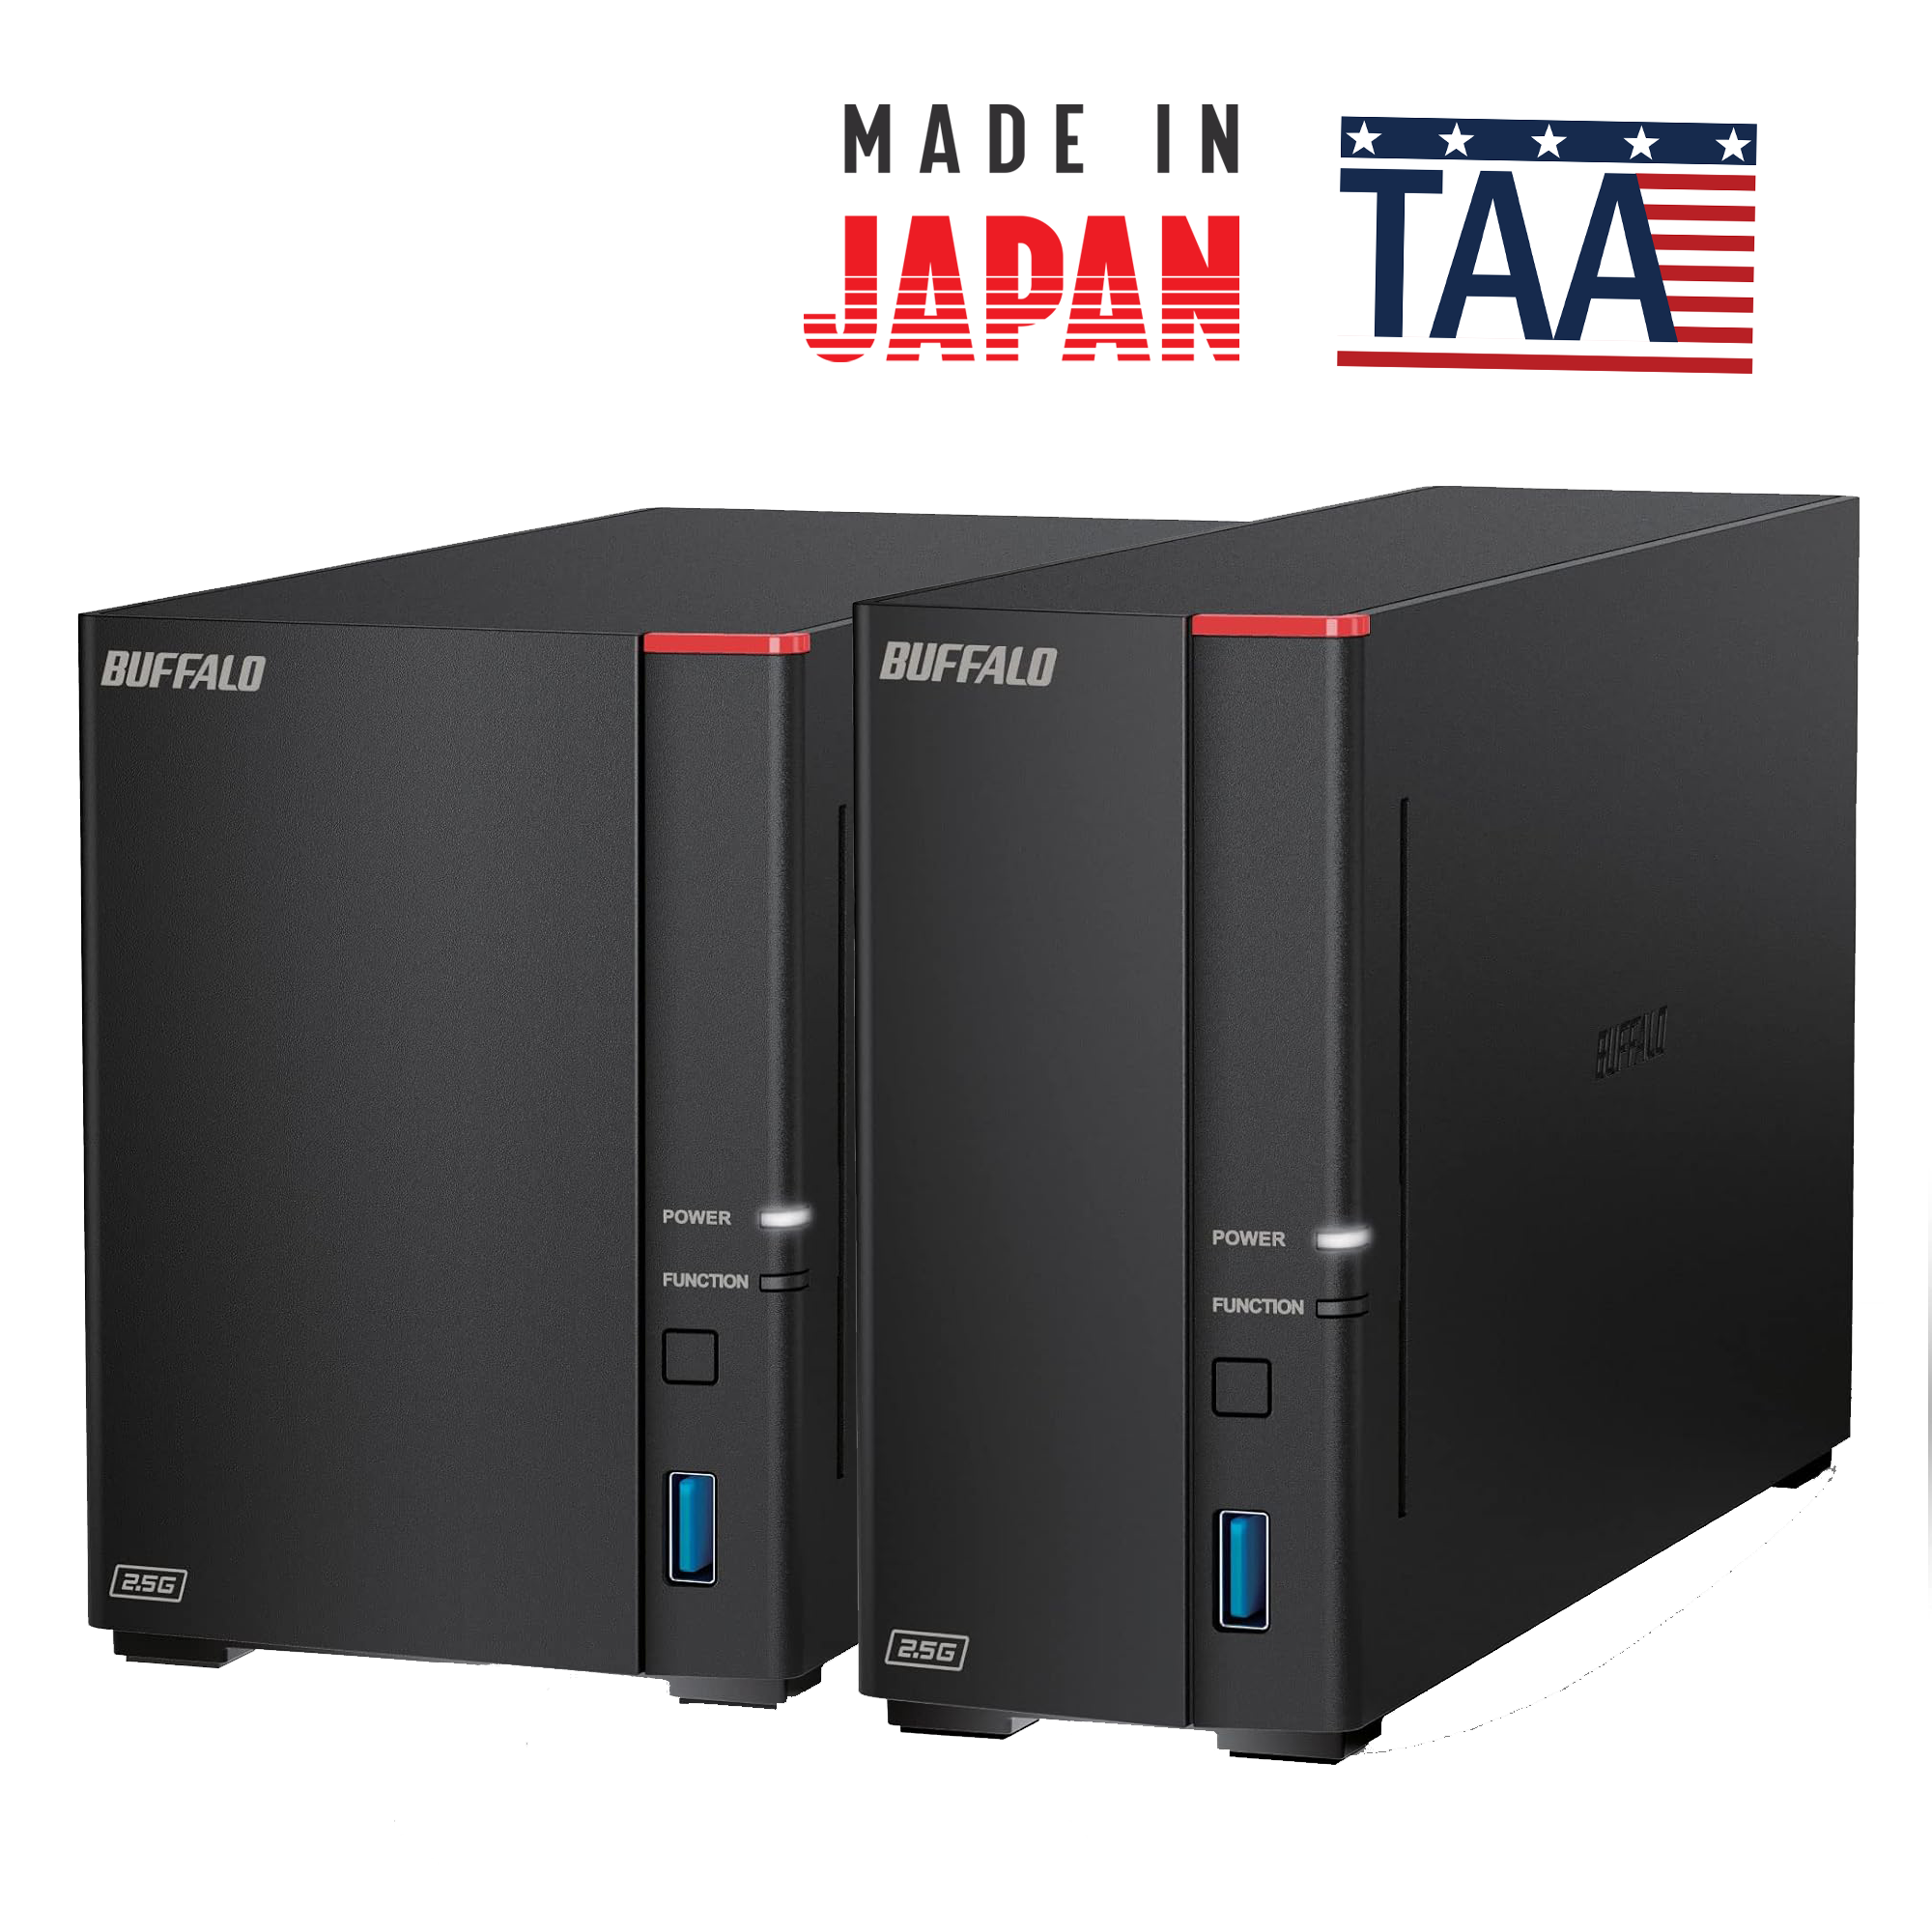 Network Attached Storage for Prosumers and Creative Professionals